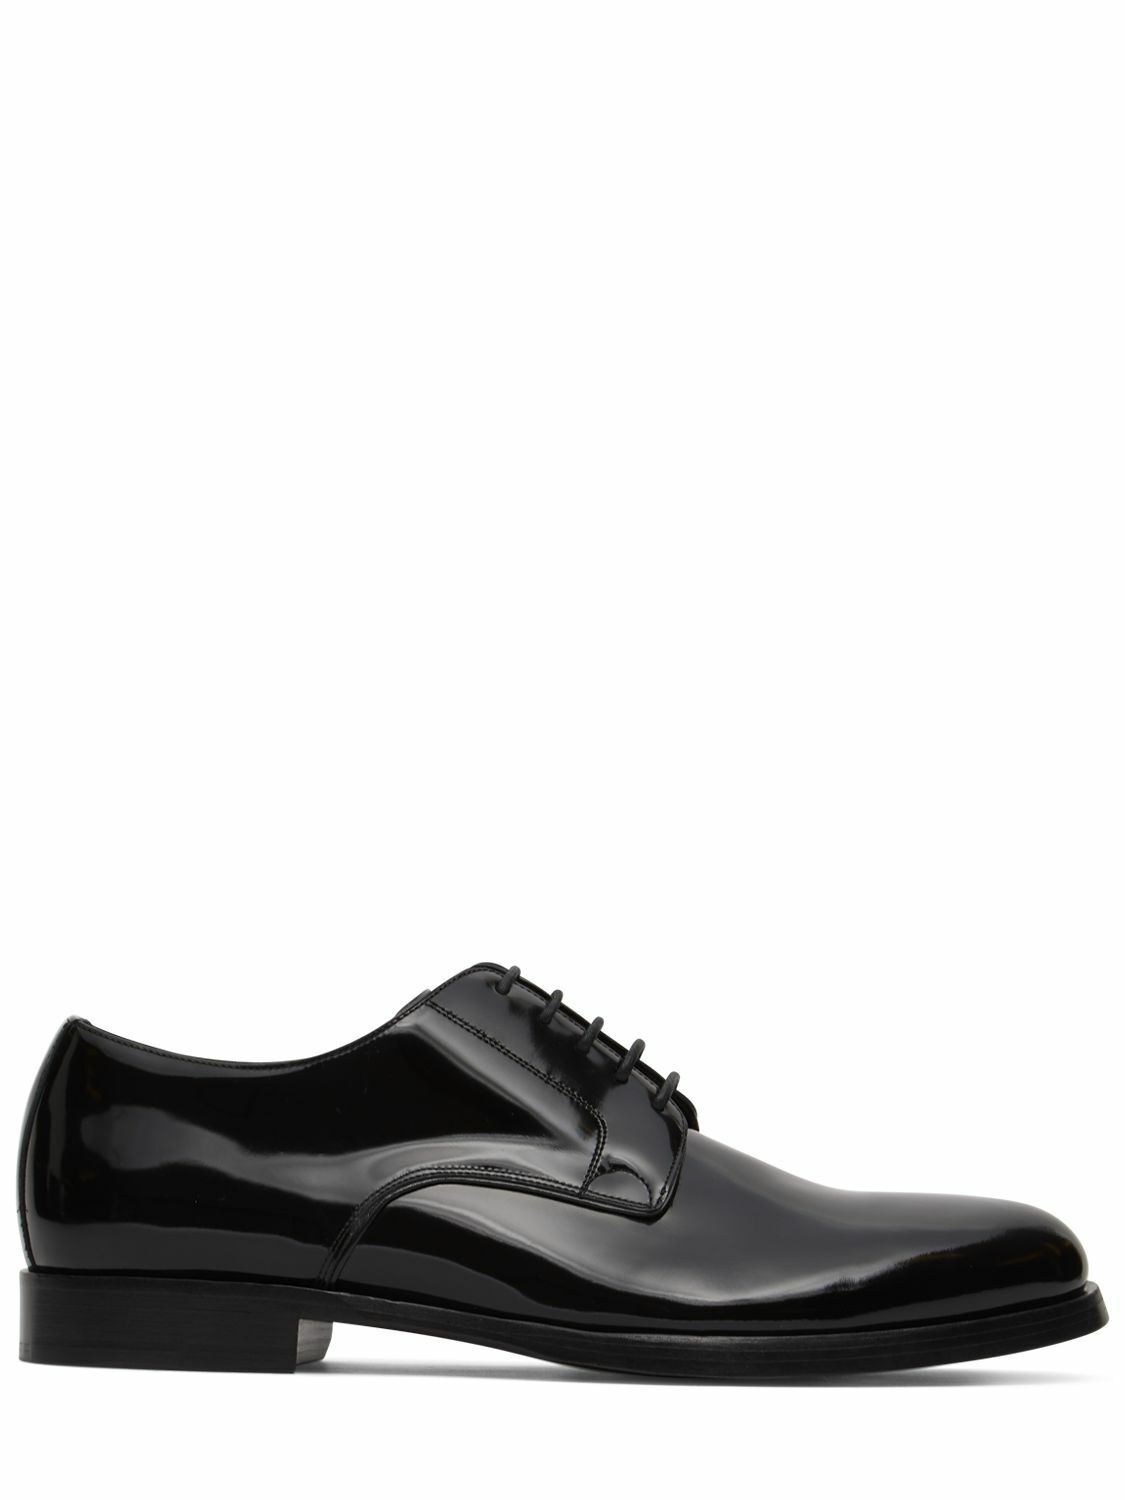 Photo: DOLCE & GABBANA - Formal Leather Derby Shoes